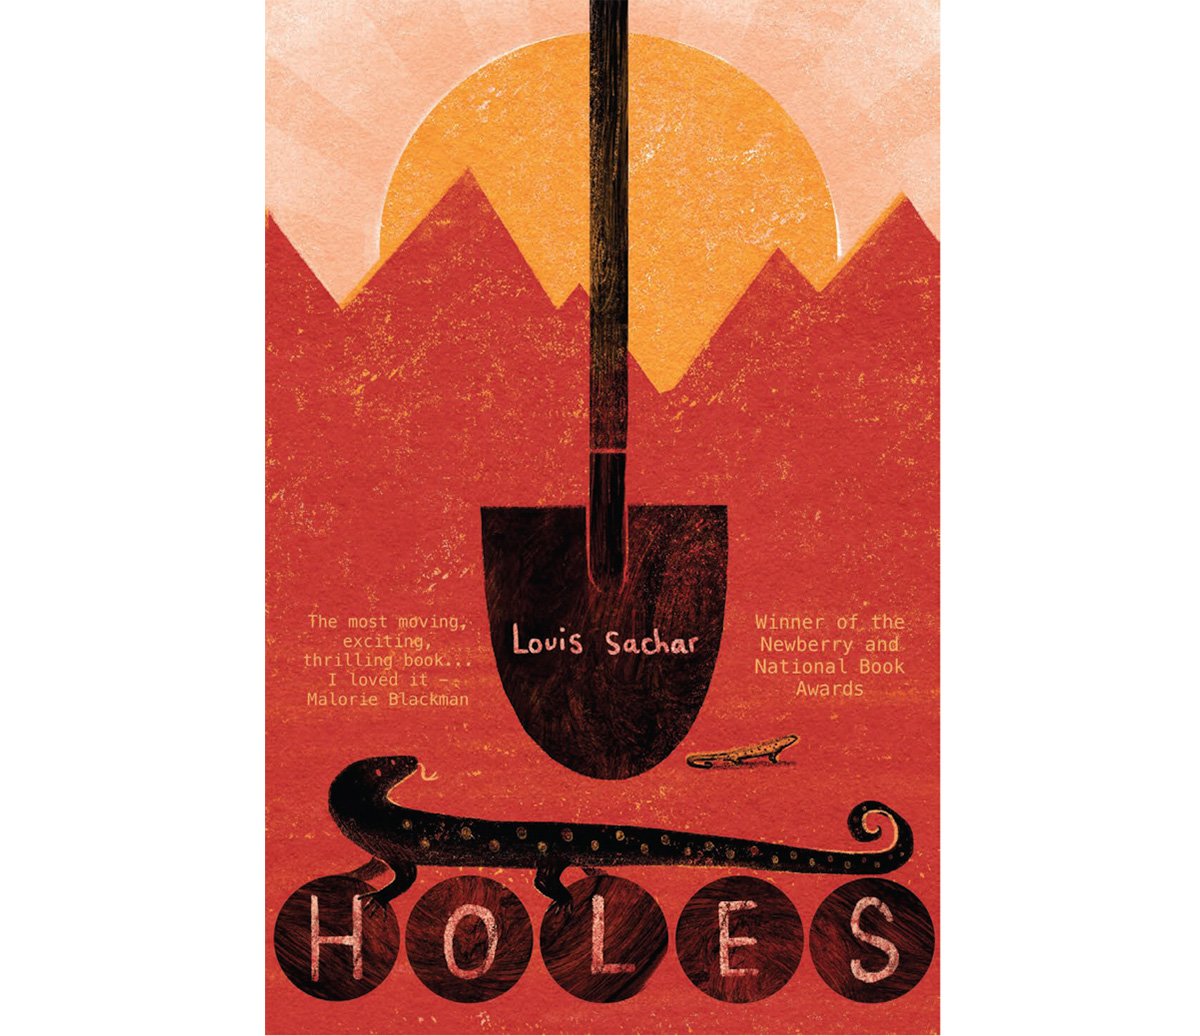 alice-courtley-holes-book-cover.jpg